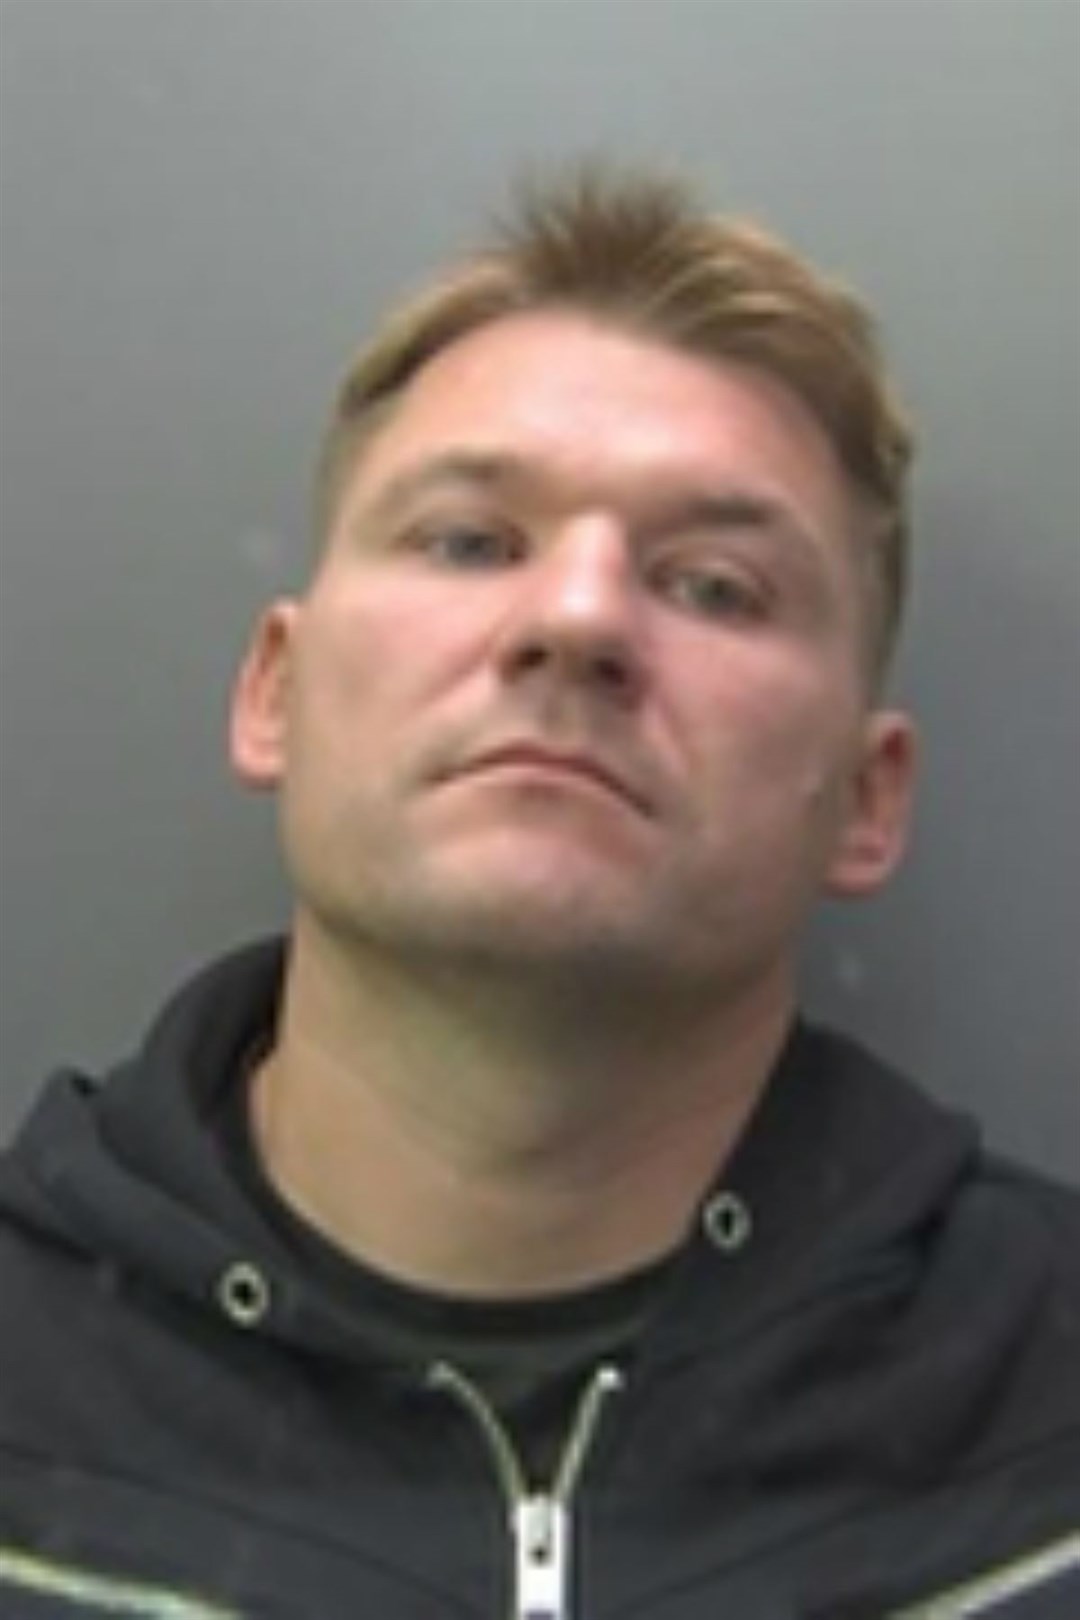 Vytautas Kiminius has fled the UK after being found guilty of causing Rachel Radwell’s death by dangerous driving (Cambridgeshire Police/PA)